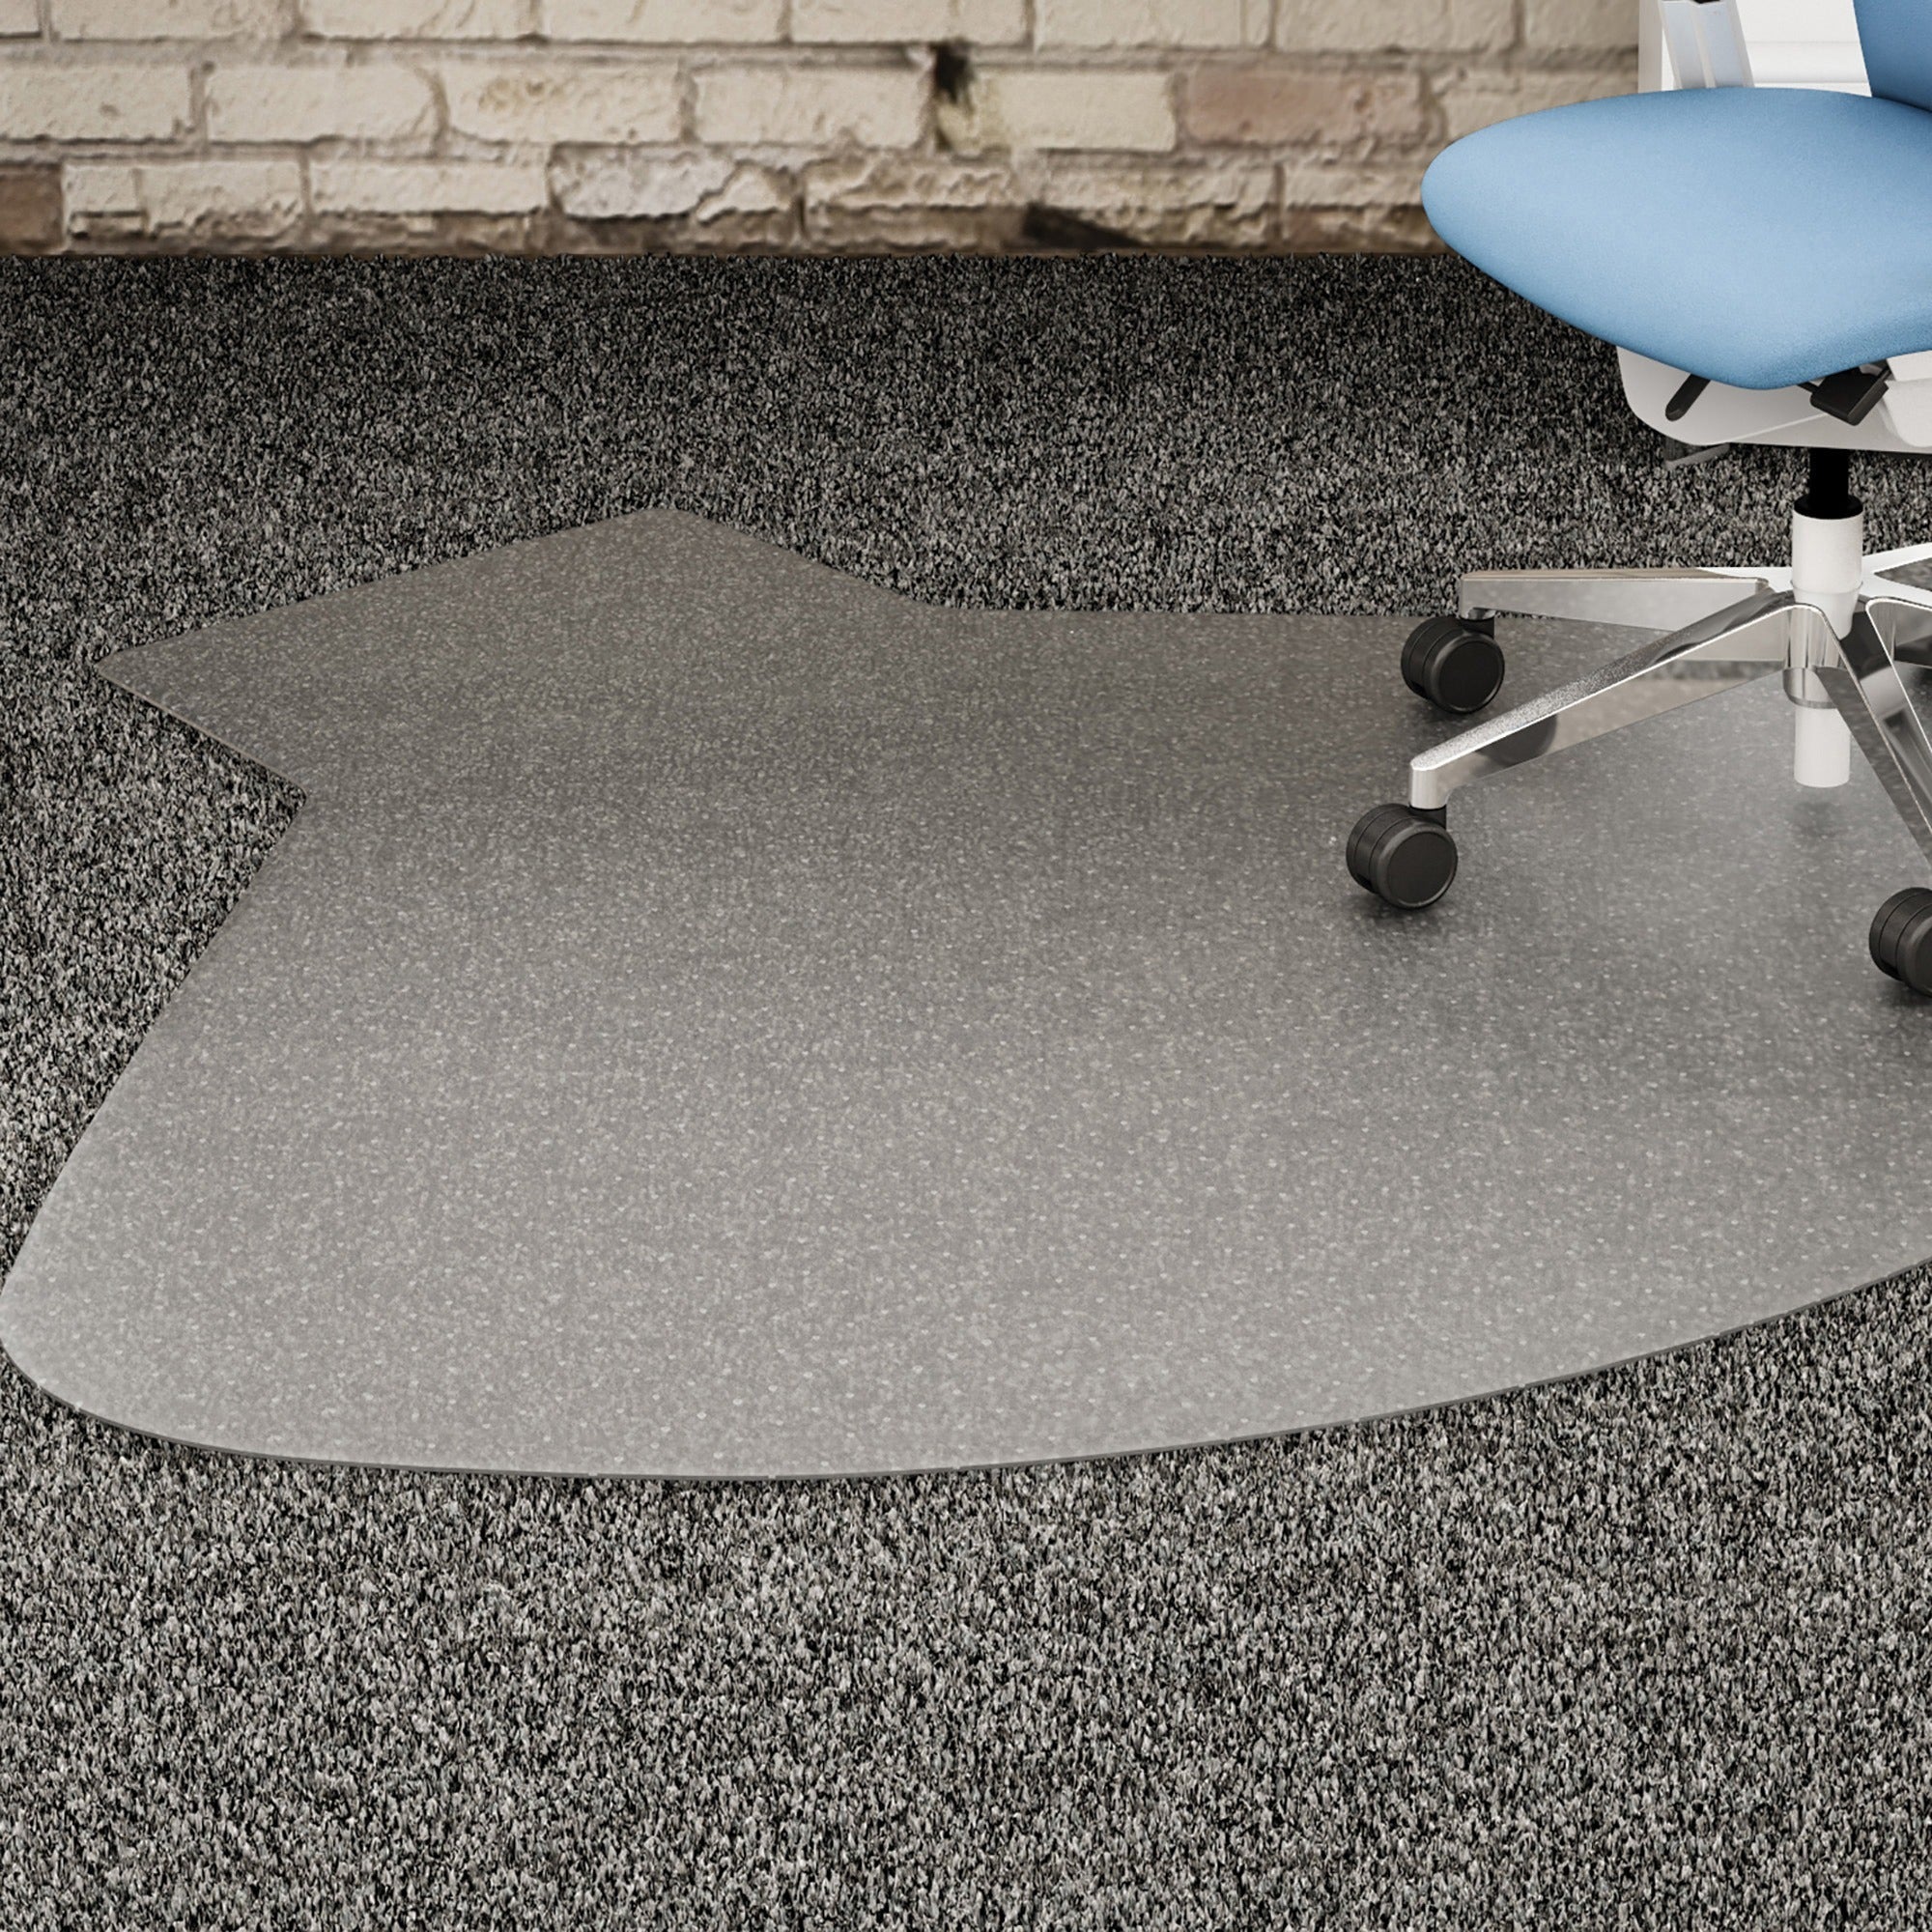 Lorell L-Workstation Medium-pile Chairmat - Carpeted Floor - 66" Length x 60" Width x 0.125" Thickness - Lip Size 12" Length x 20" Width - Vinyl - Clear - 1Each - 